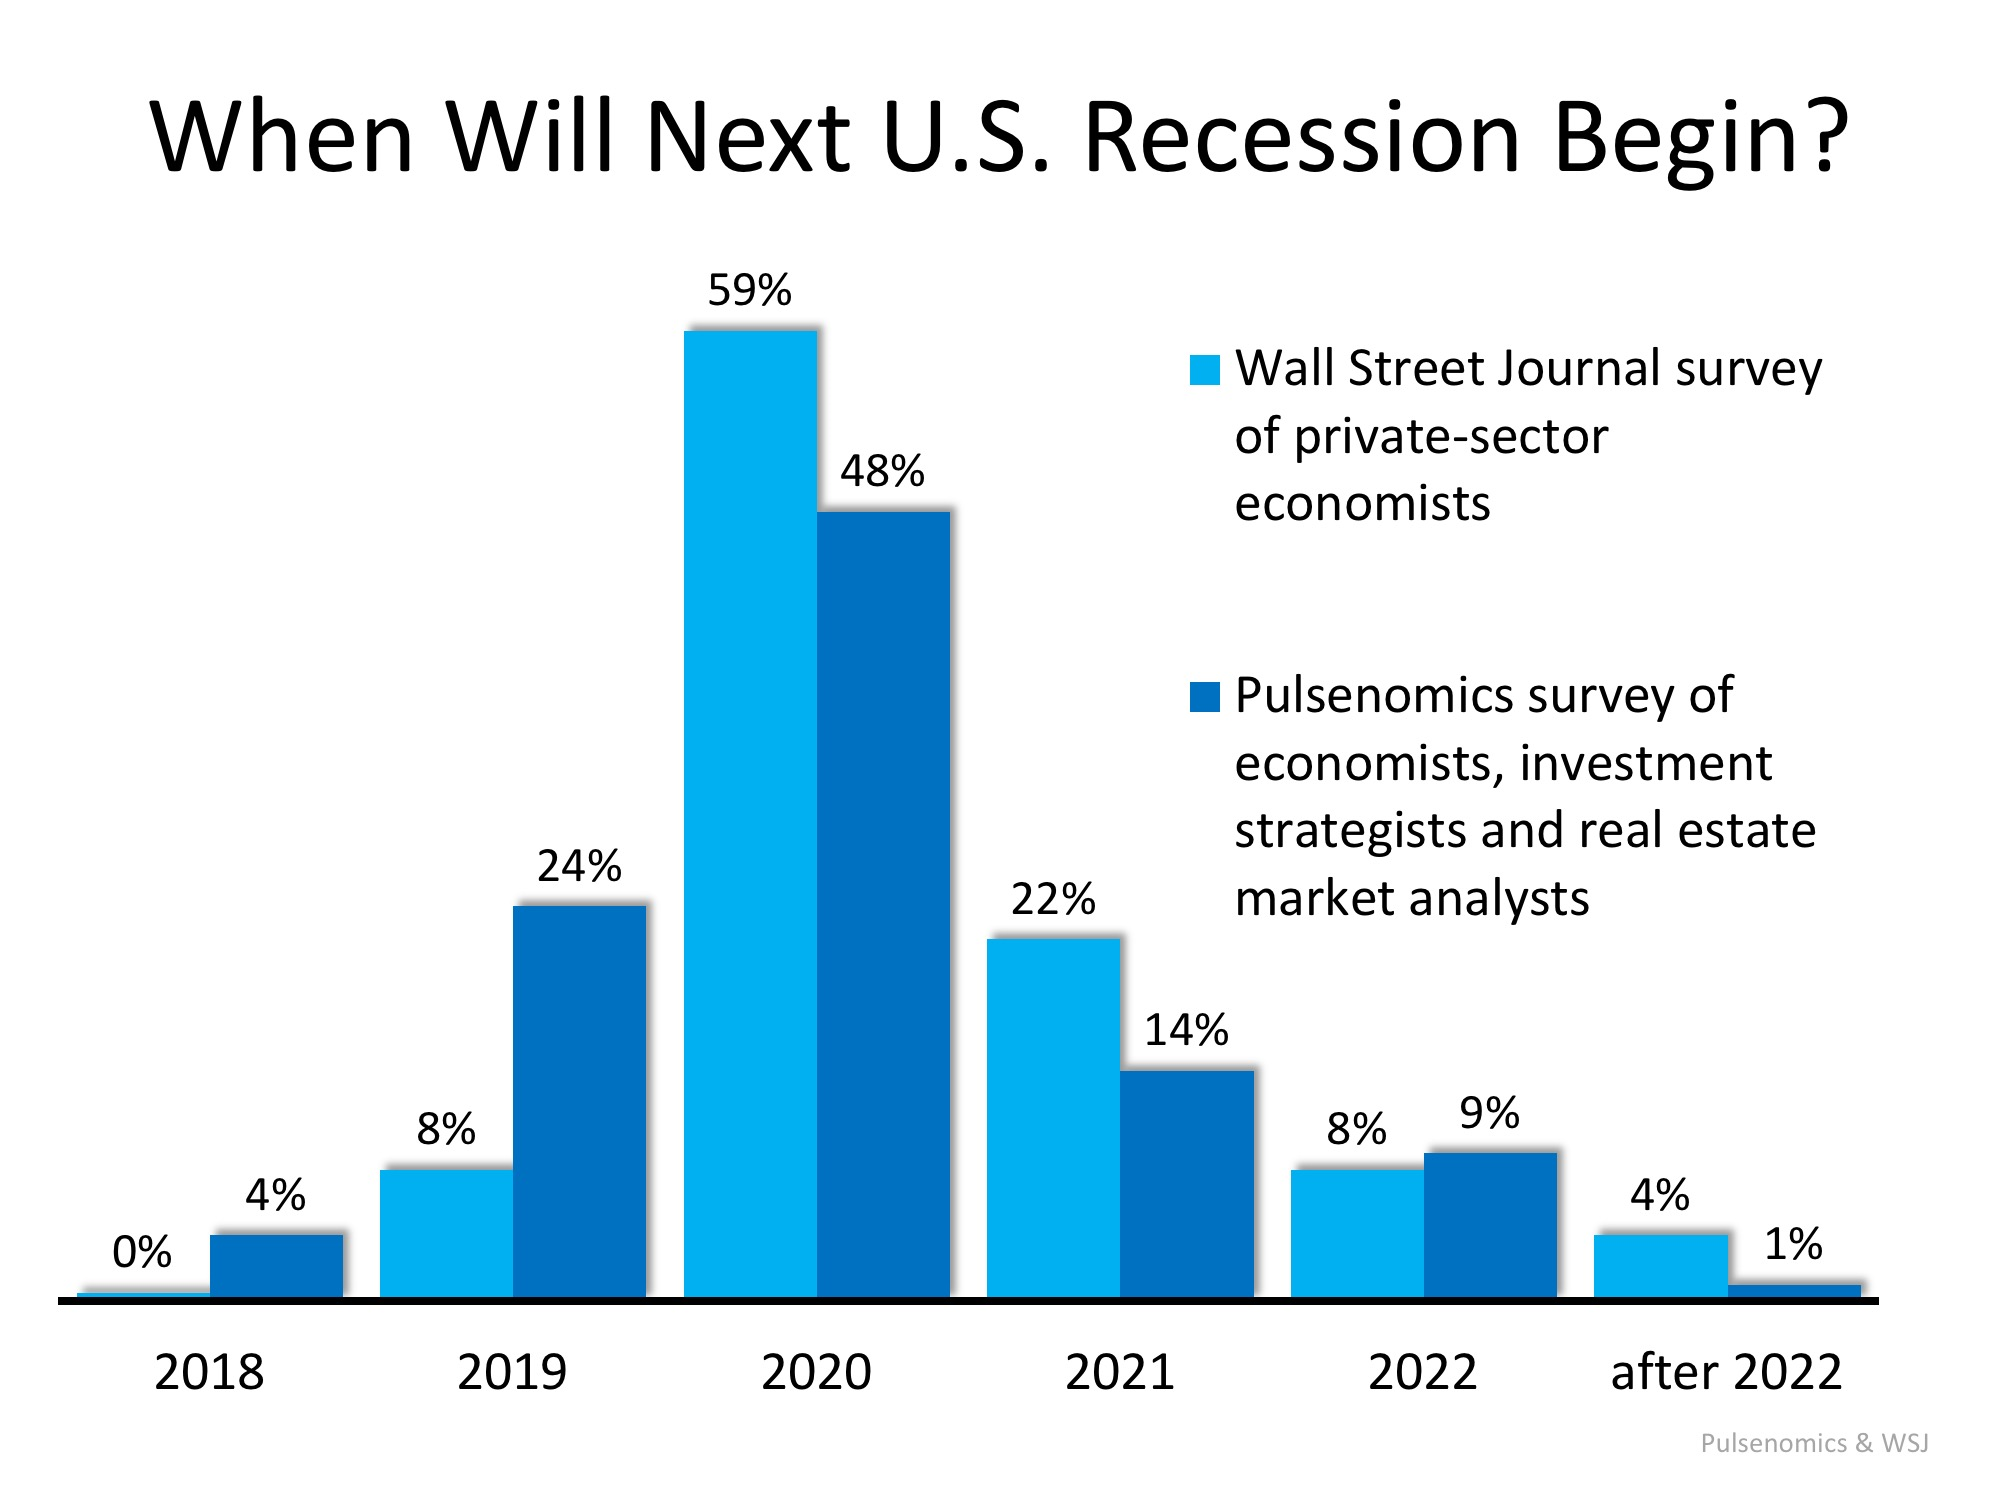 Next Recession in 2020? What Will Be the Impact?